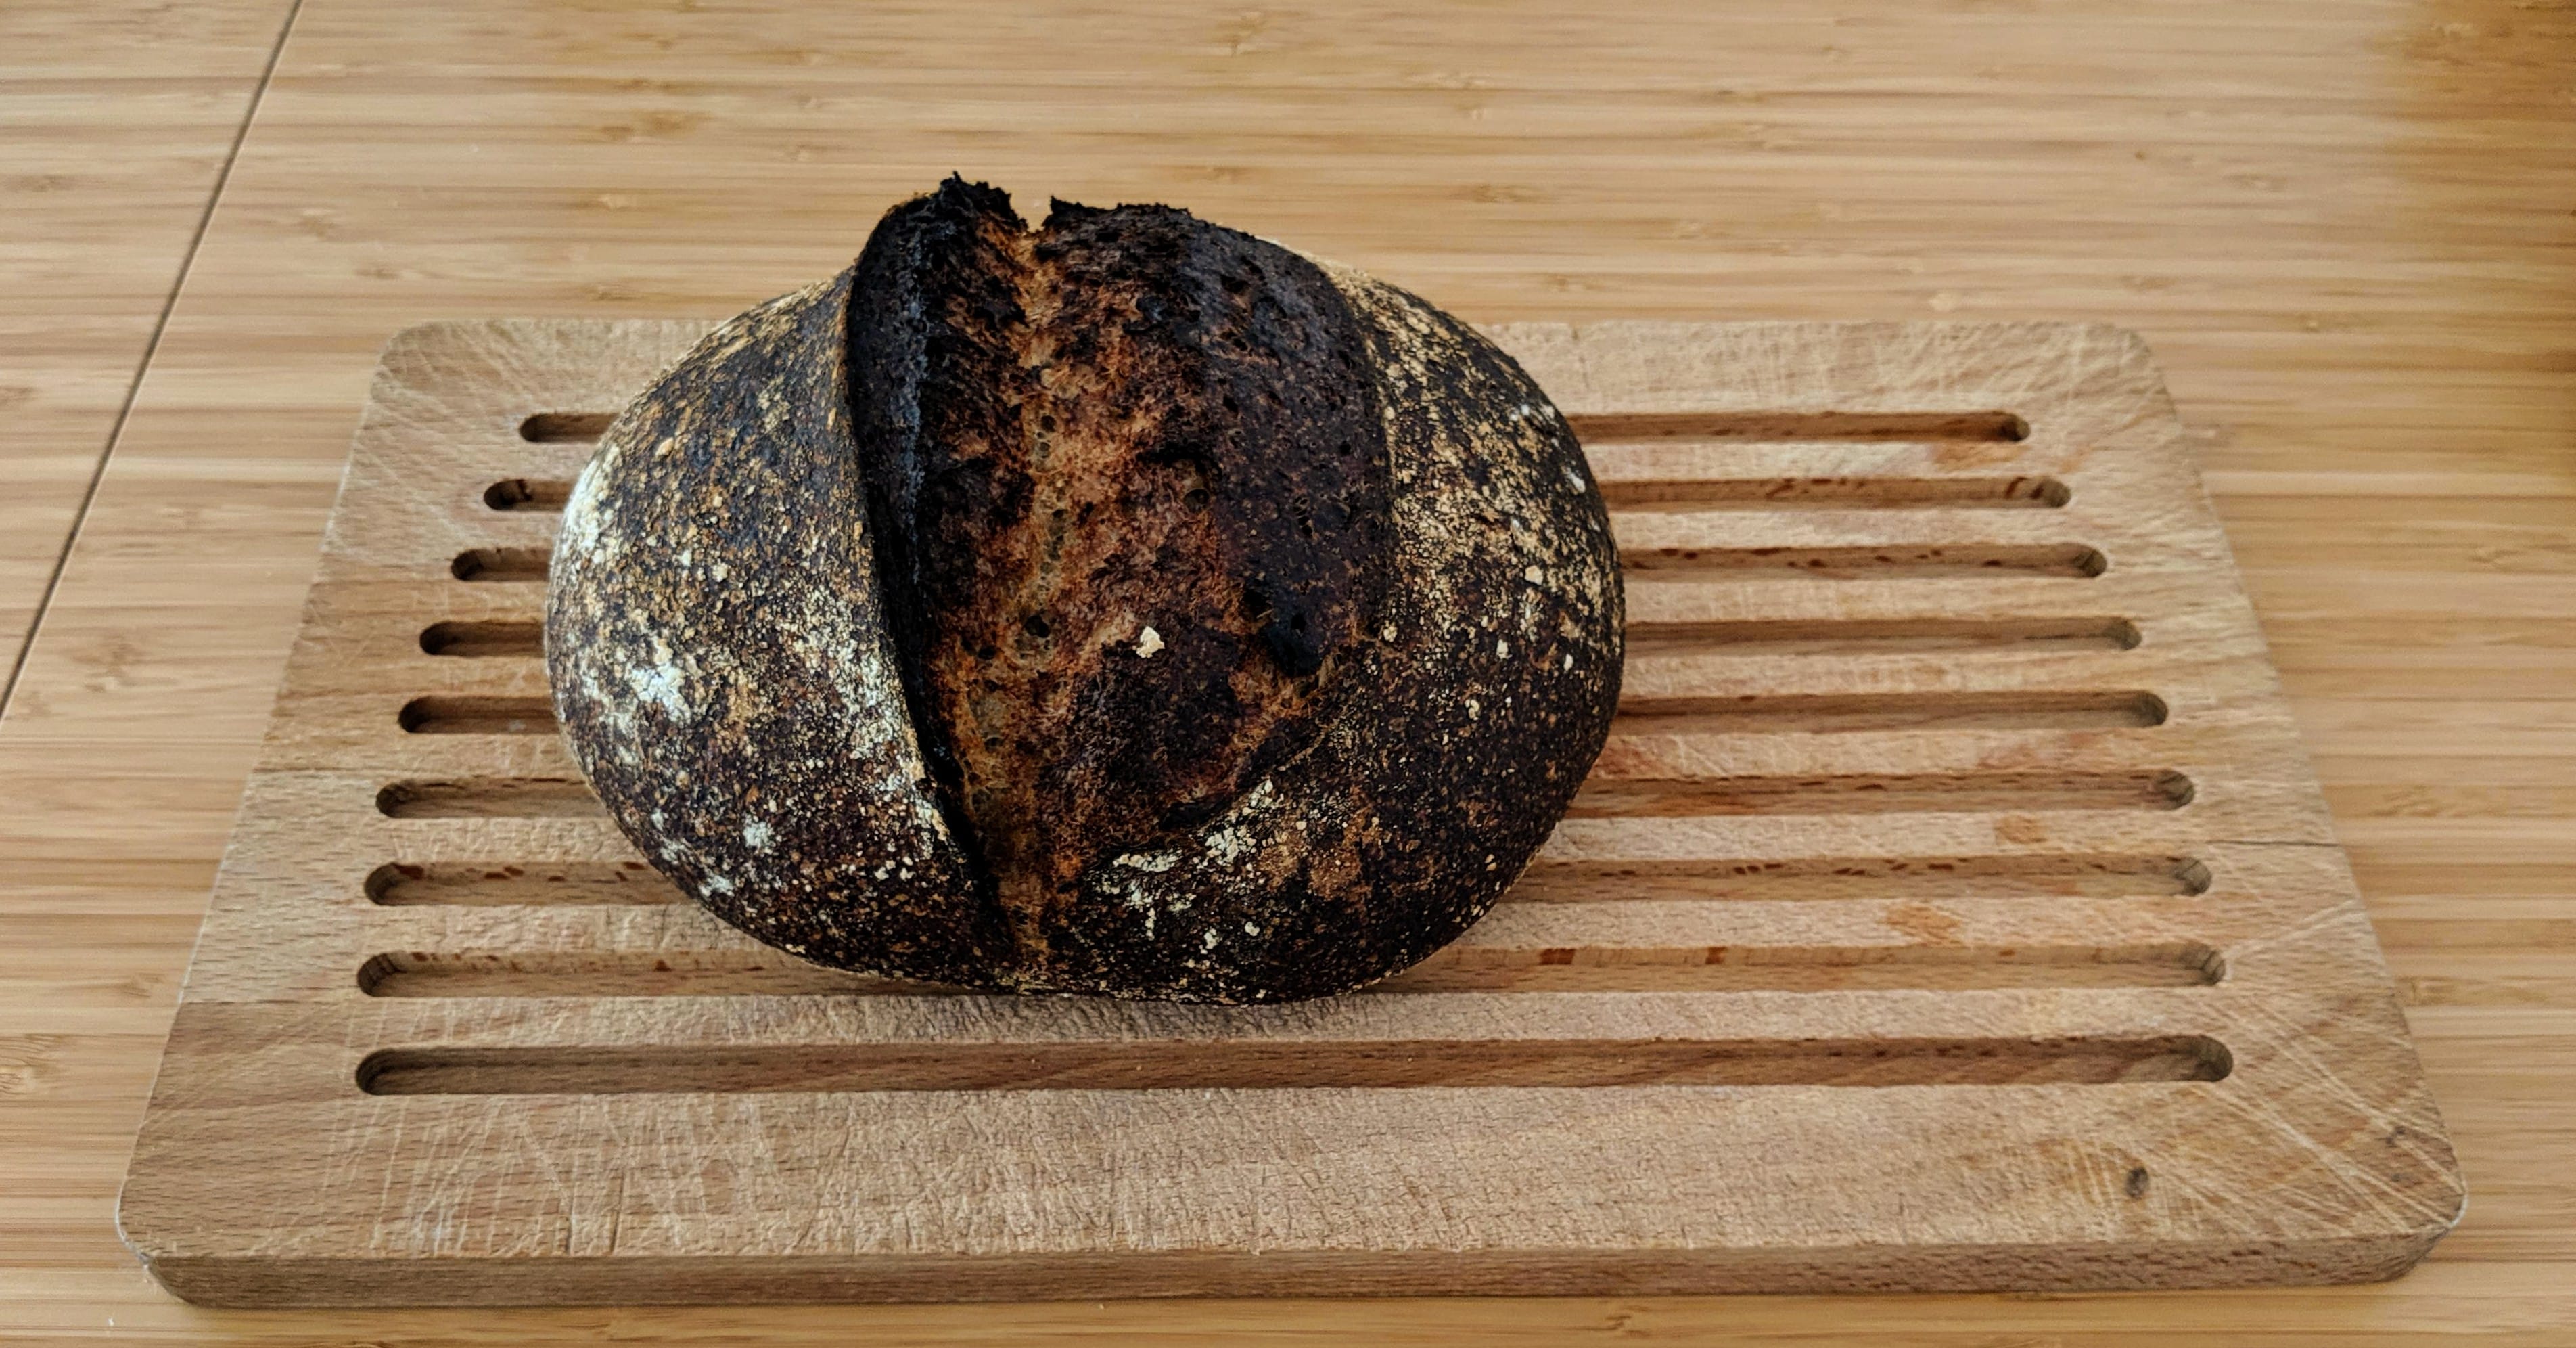 An image of a bread called “Post-USA Wholemeal Sourdough”